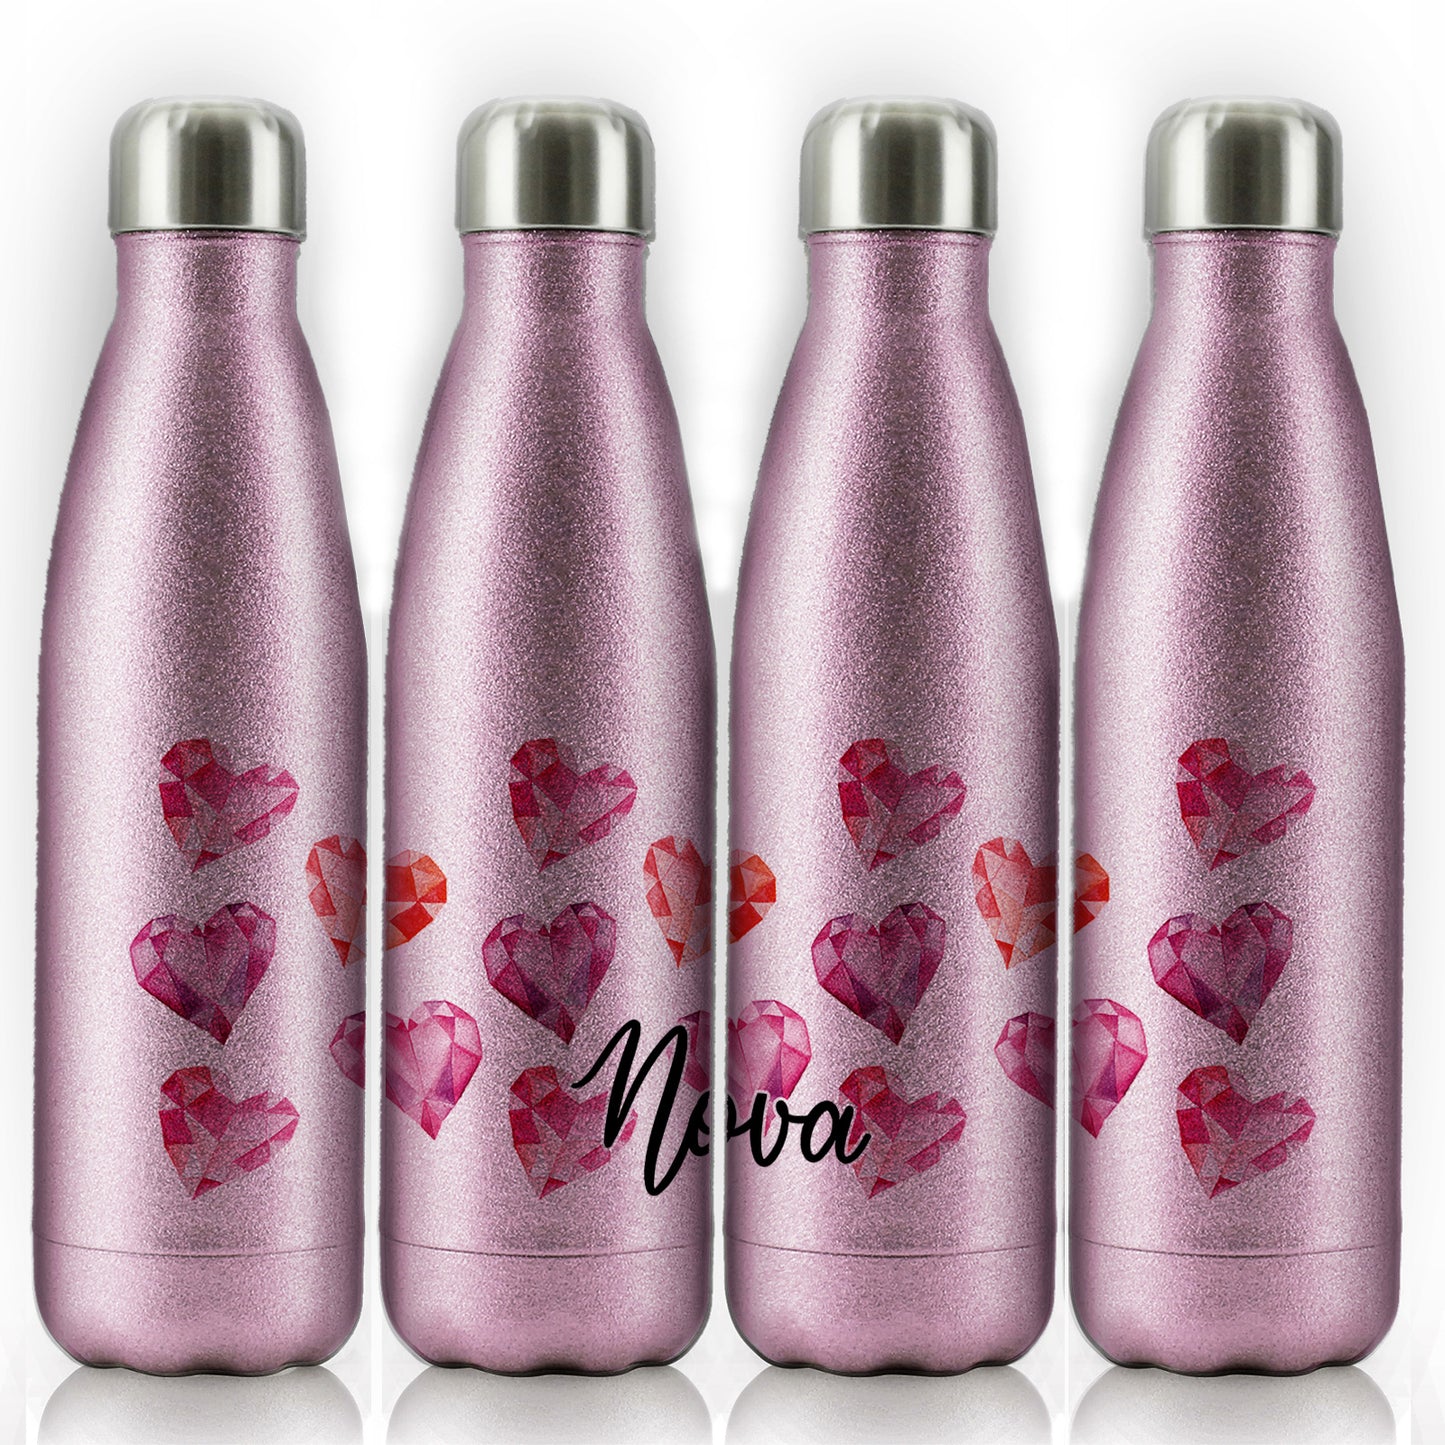 Personalised Cola Bottle with Stylish Text and Crystal Hearts Print